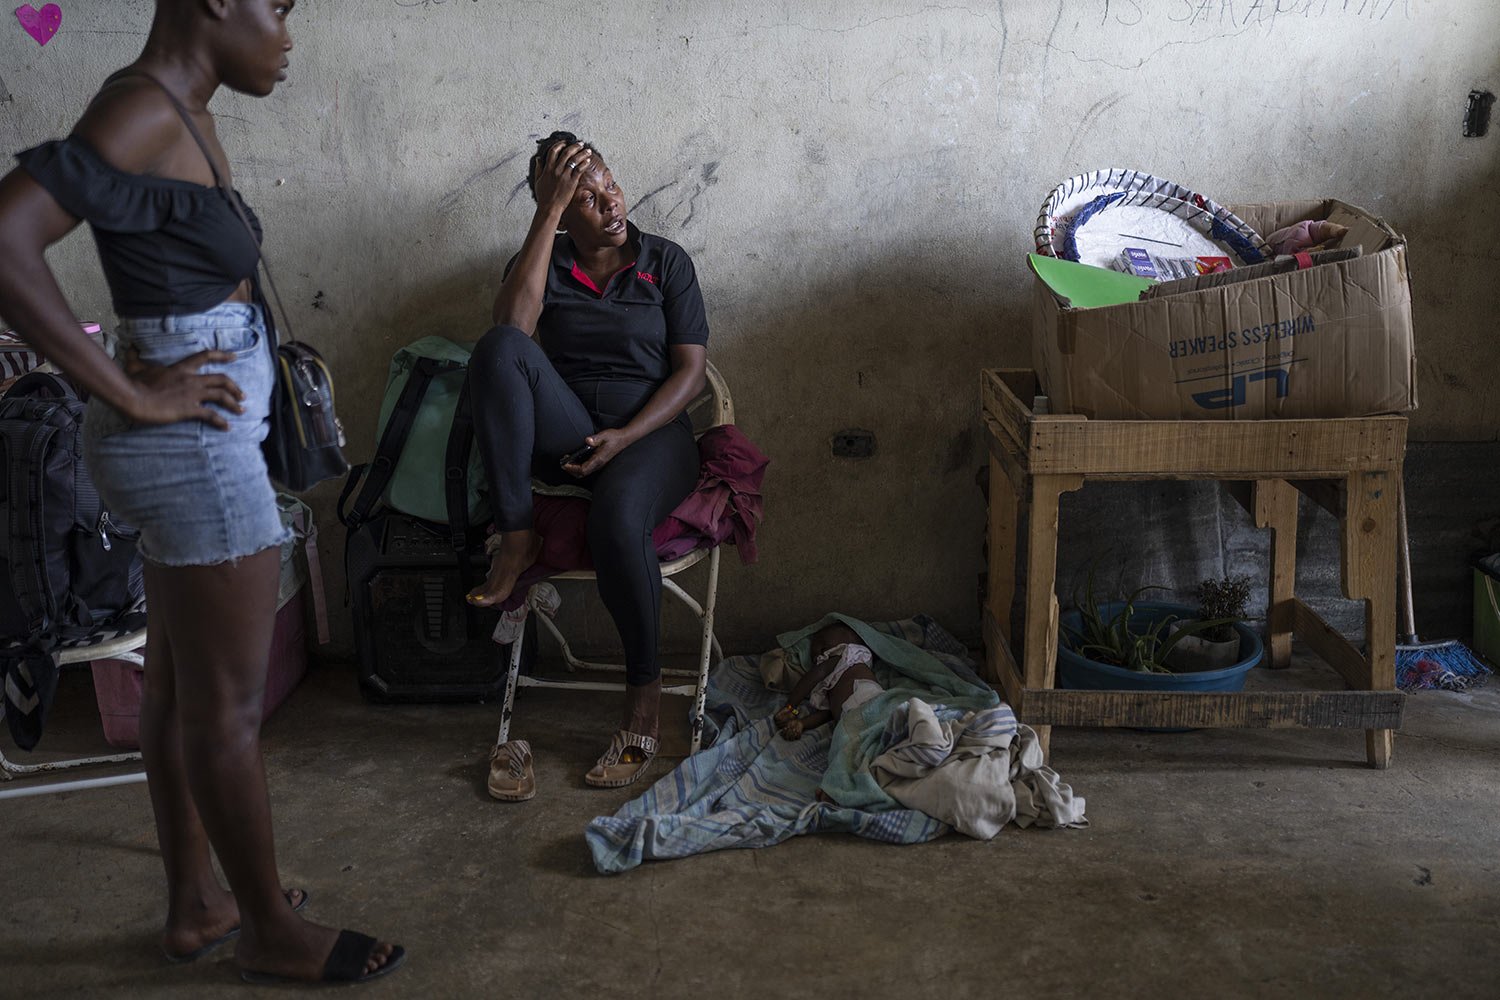  Elise Messadien cries as she sits next to the body of her one-year-old goddaughter, believed to have died of dehydration, at a shelter for people displaced by gang violence in Port-au-Prince, Haiti, May 30, 2023. (AP Photo/Ariana Cubillos) 